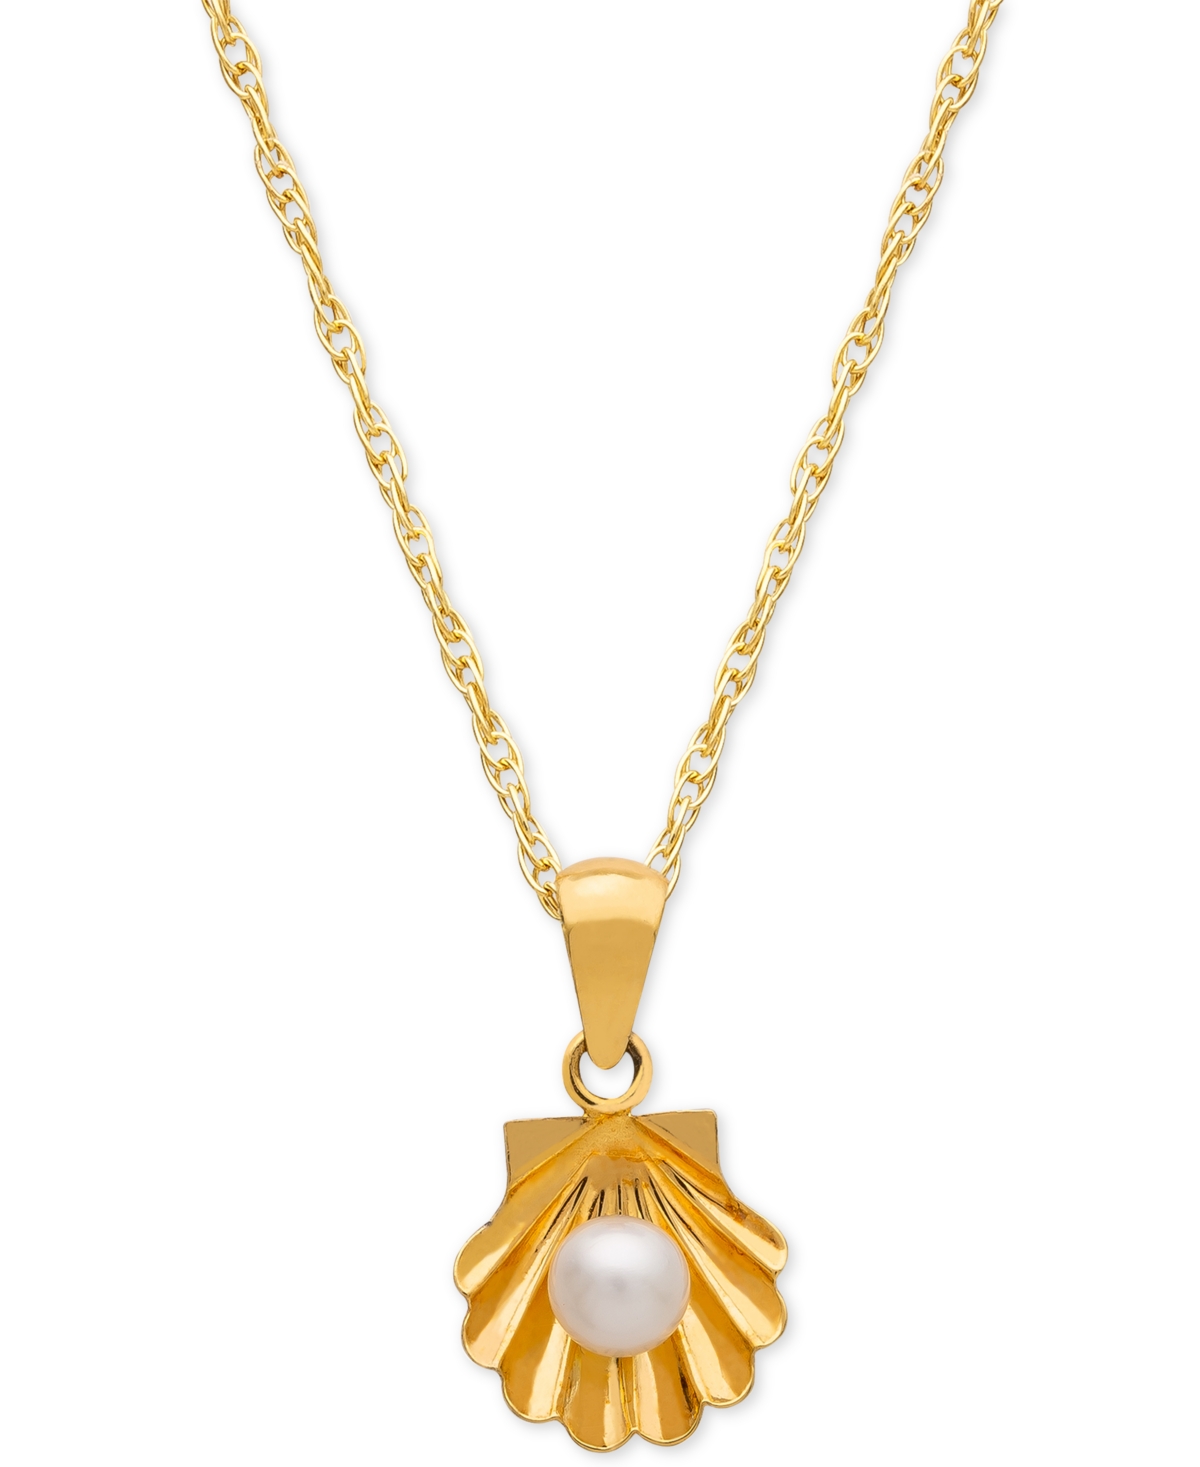 Little Mermaid Ariel Shell Mother-of-Pearl Bead 15" Pendant Necklace in 14k Gold - Yellow Gold